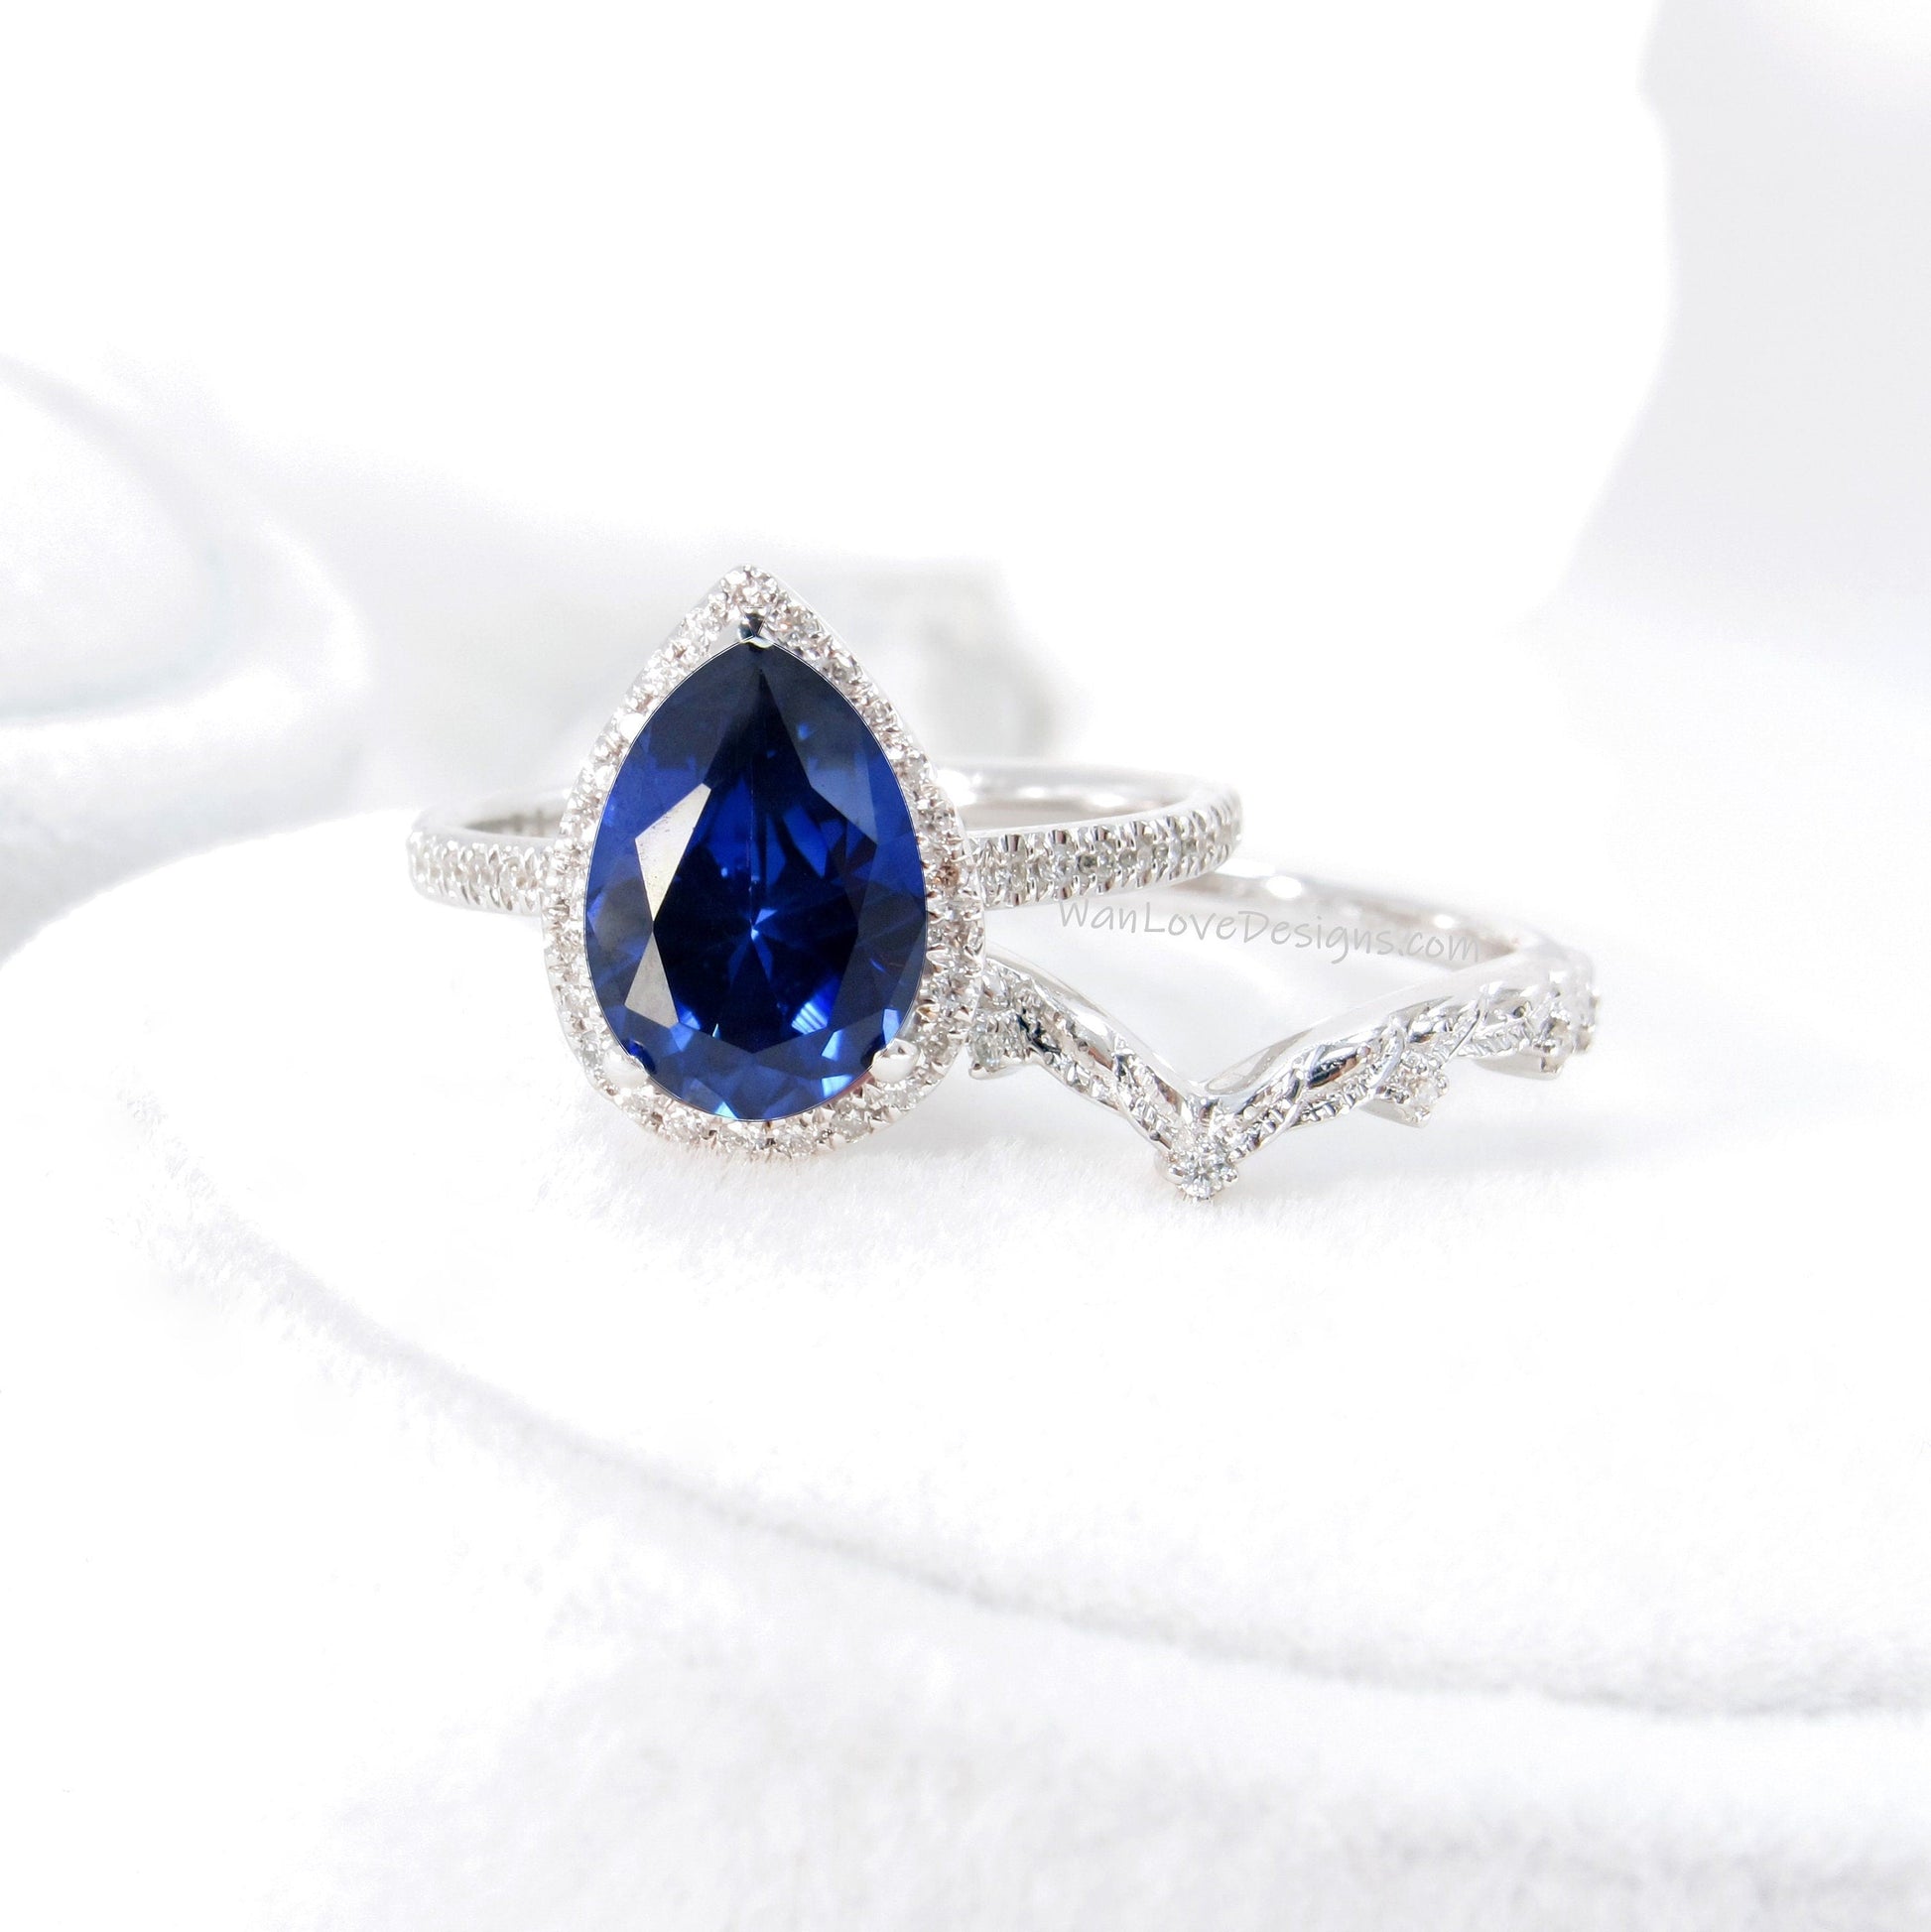 Pear halo blue sapphire and diamond ring set, engagement ring & 7 gem wedding band, sapphire ring, diamond wedding ring, leaf engagement rin Wan Love Designs